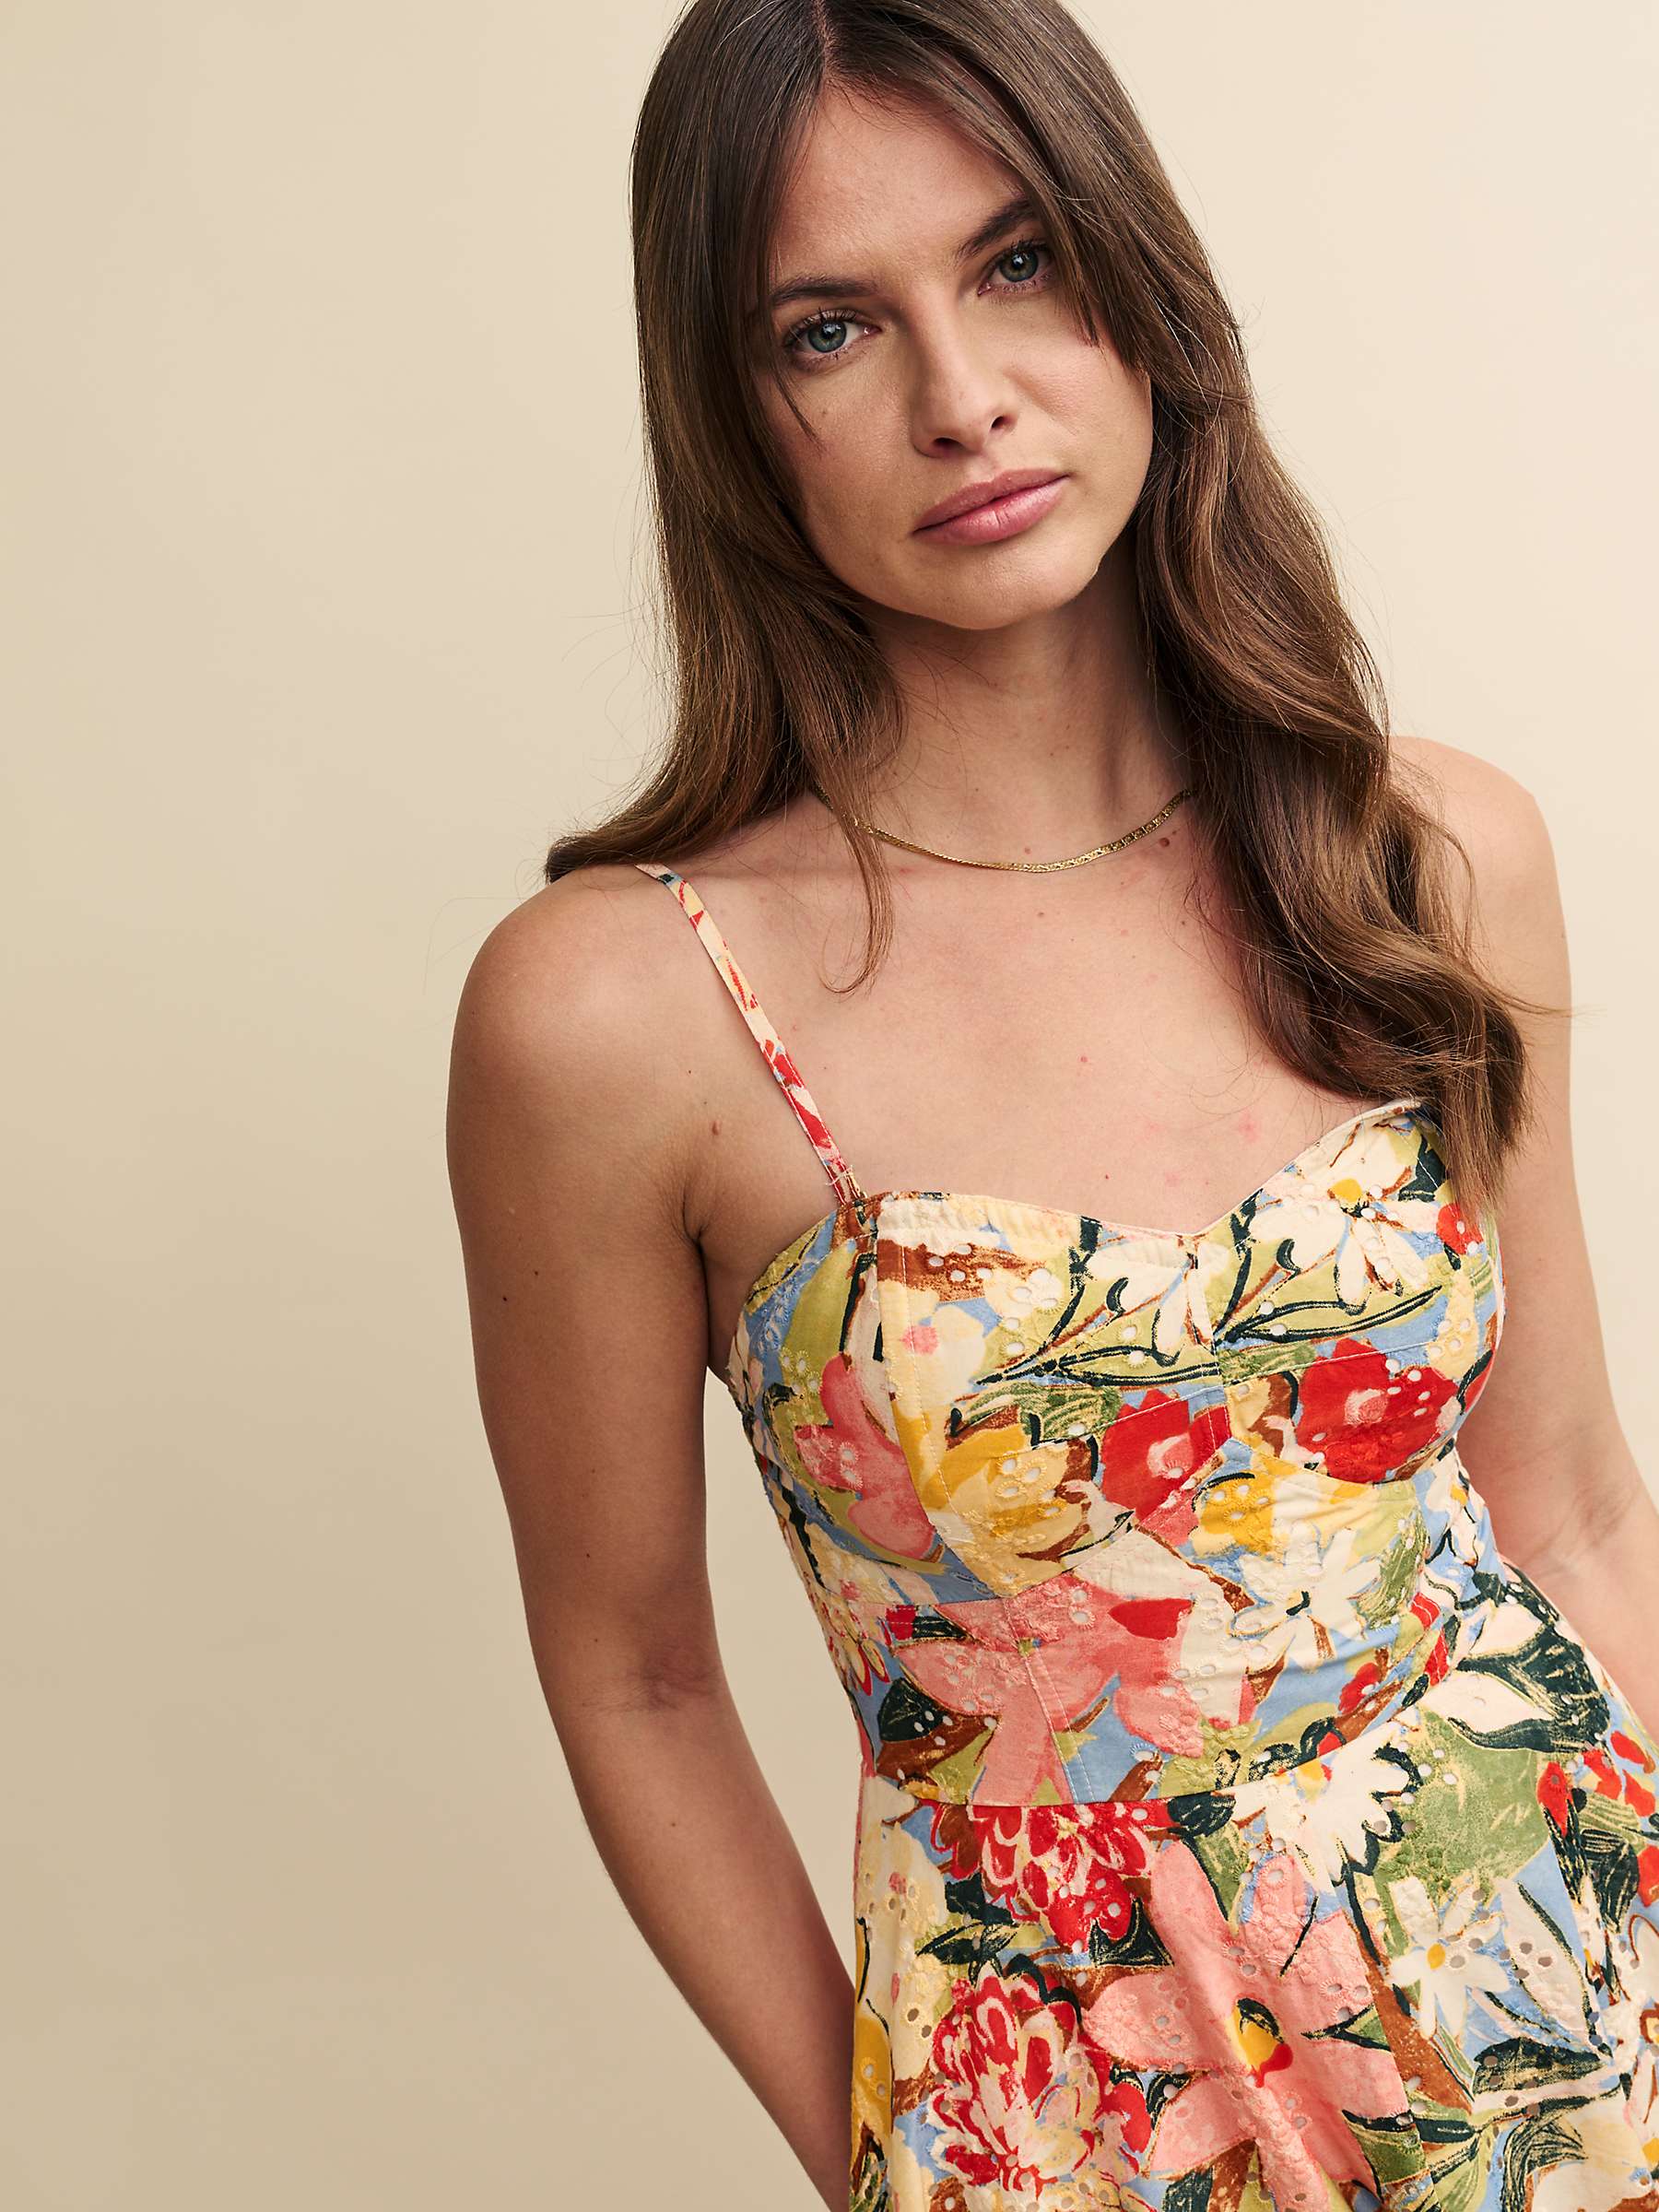 Buy Nobody's Child x Happy Place by Fearne Cotton Mykonos Bloom Floral Print Bandeau Midi Dress, Multi Online at johnlewis.com